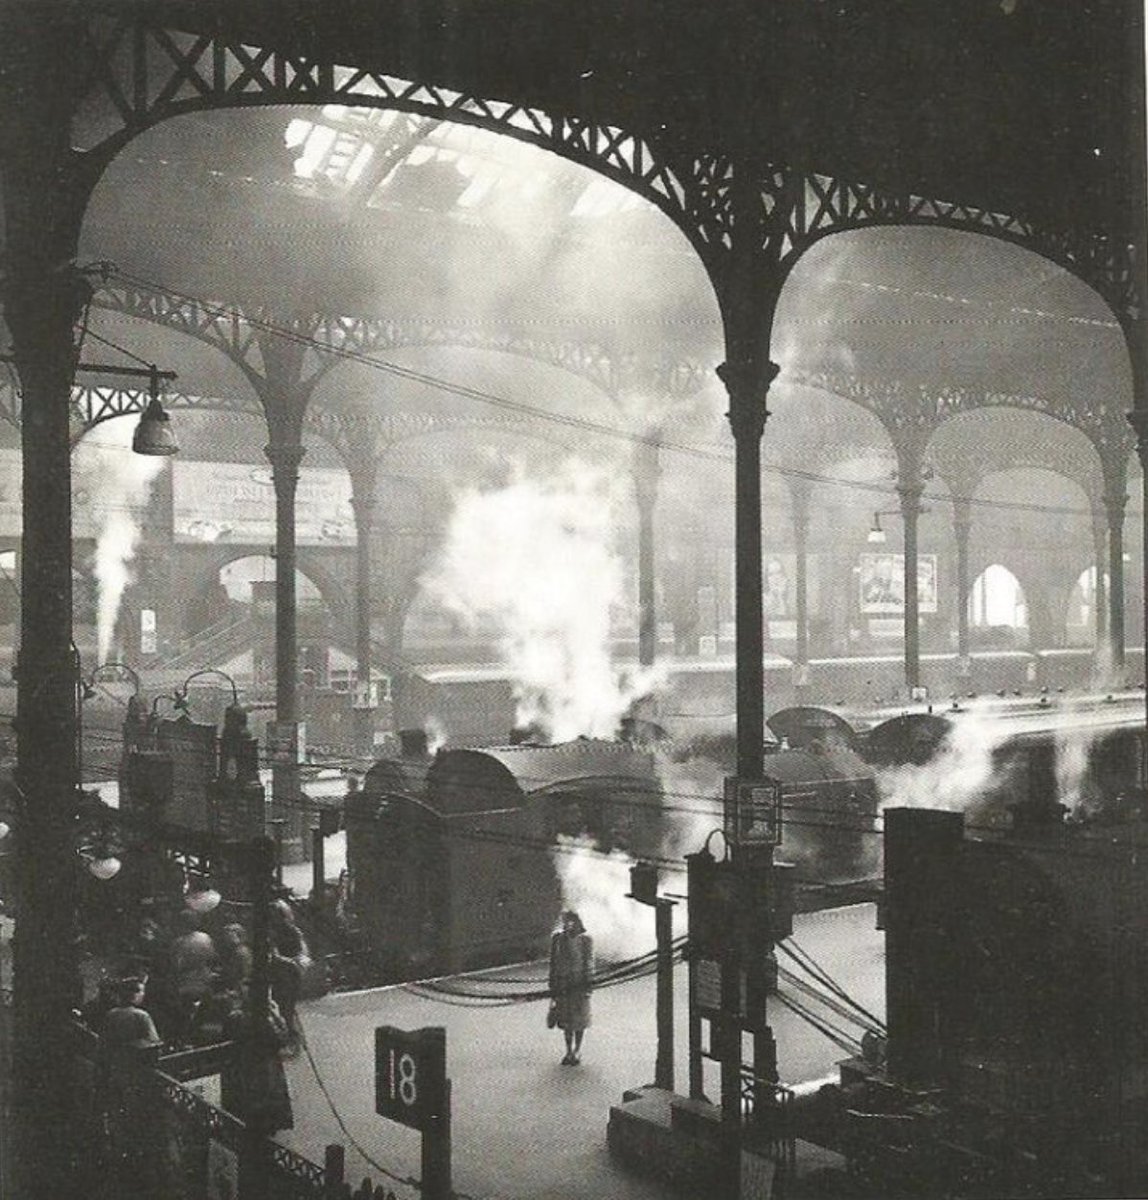 Liverpool Street Station, 1947.
If you want to #SaveLiverpoolStreetStation and protect it from harm, RT this campaign by The Victorian Society to raise vital funds to fight the development. Please give - however small or large!